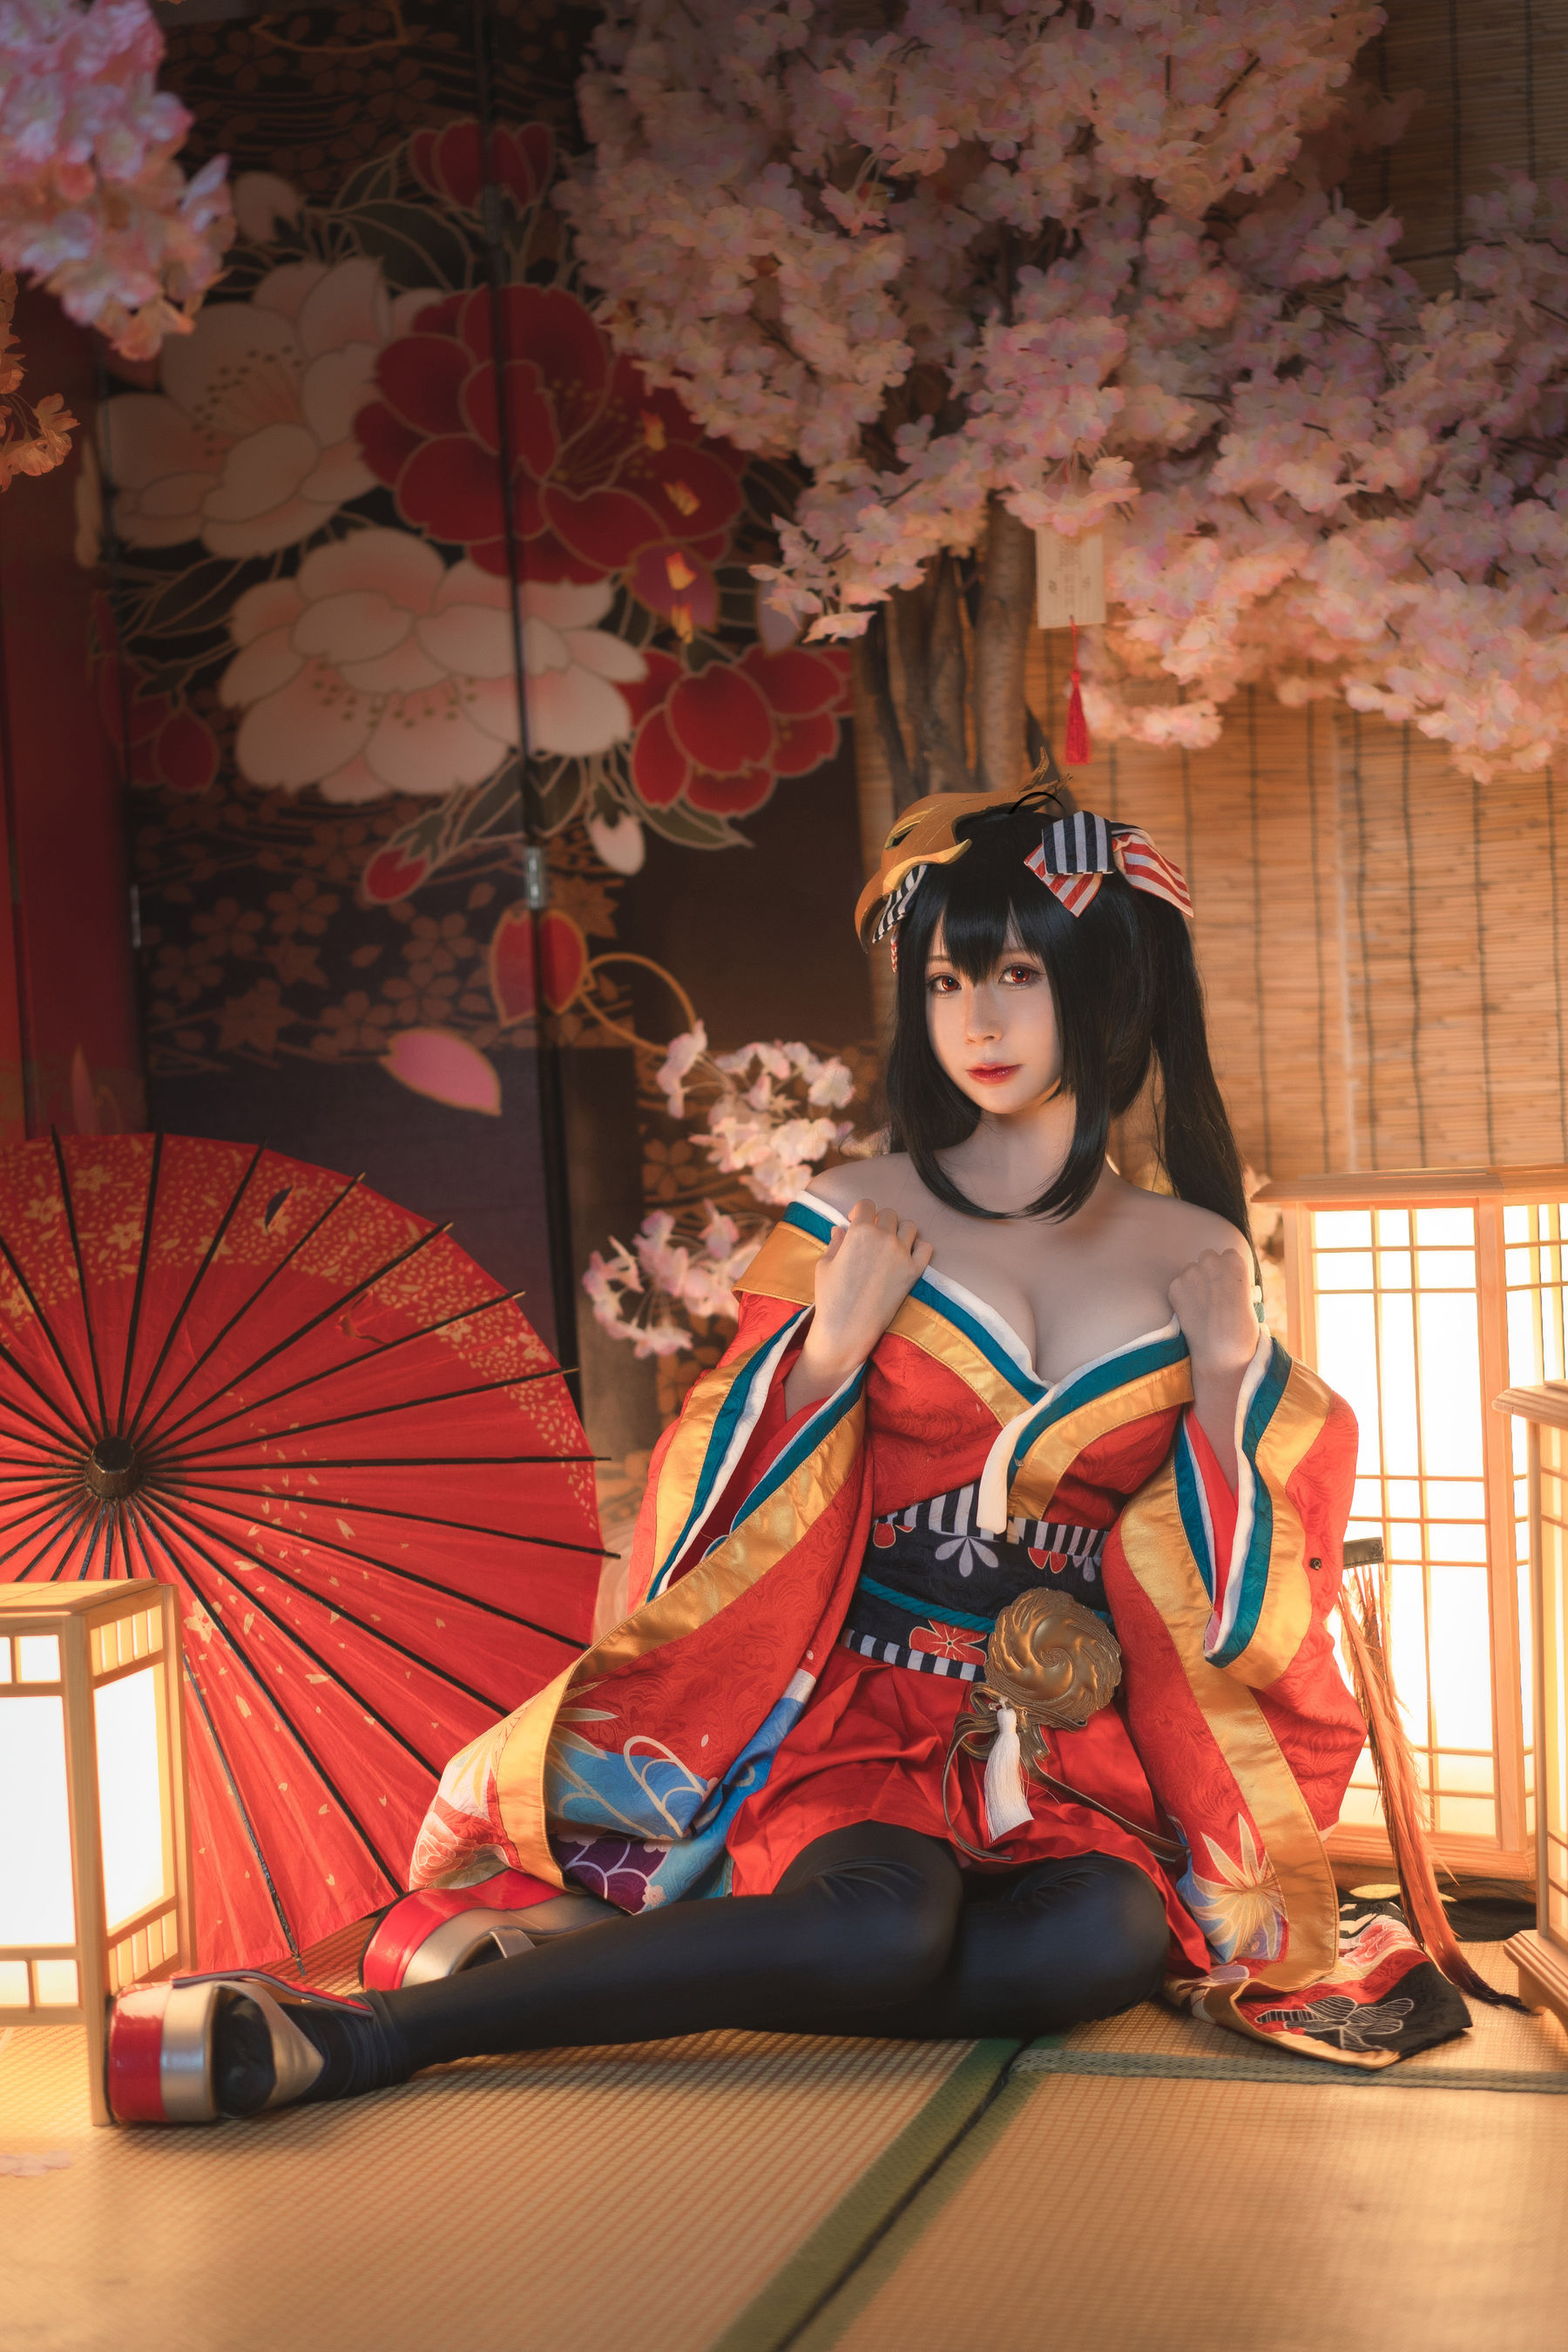 [Net Red COSER Photo] Xiyuan Temple Nange Photo - Dafeng Original Leather Page 6 No.dbbbed